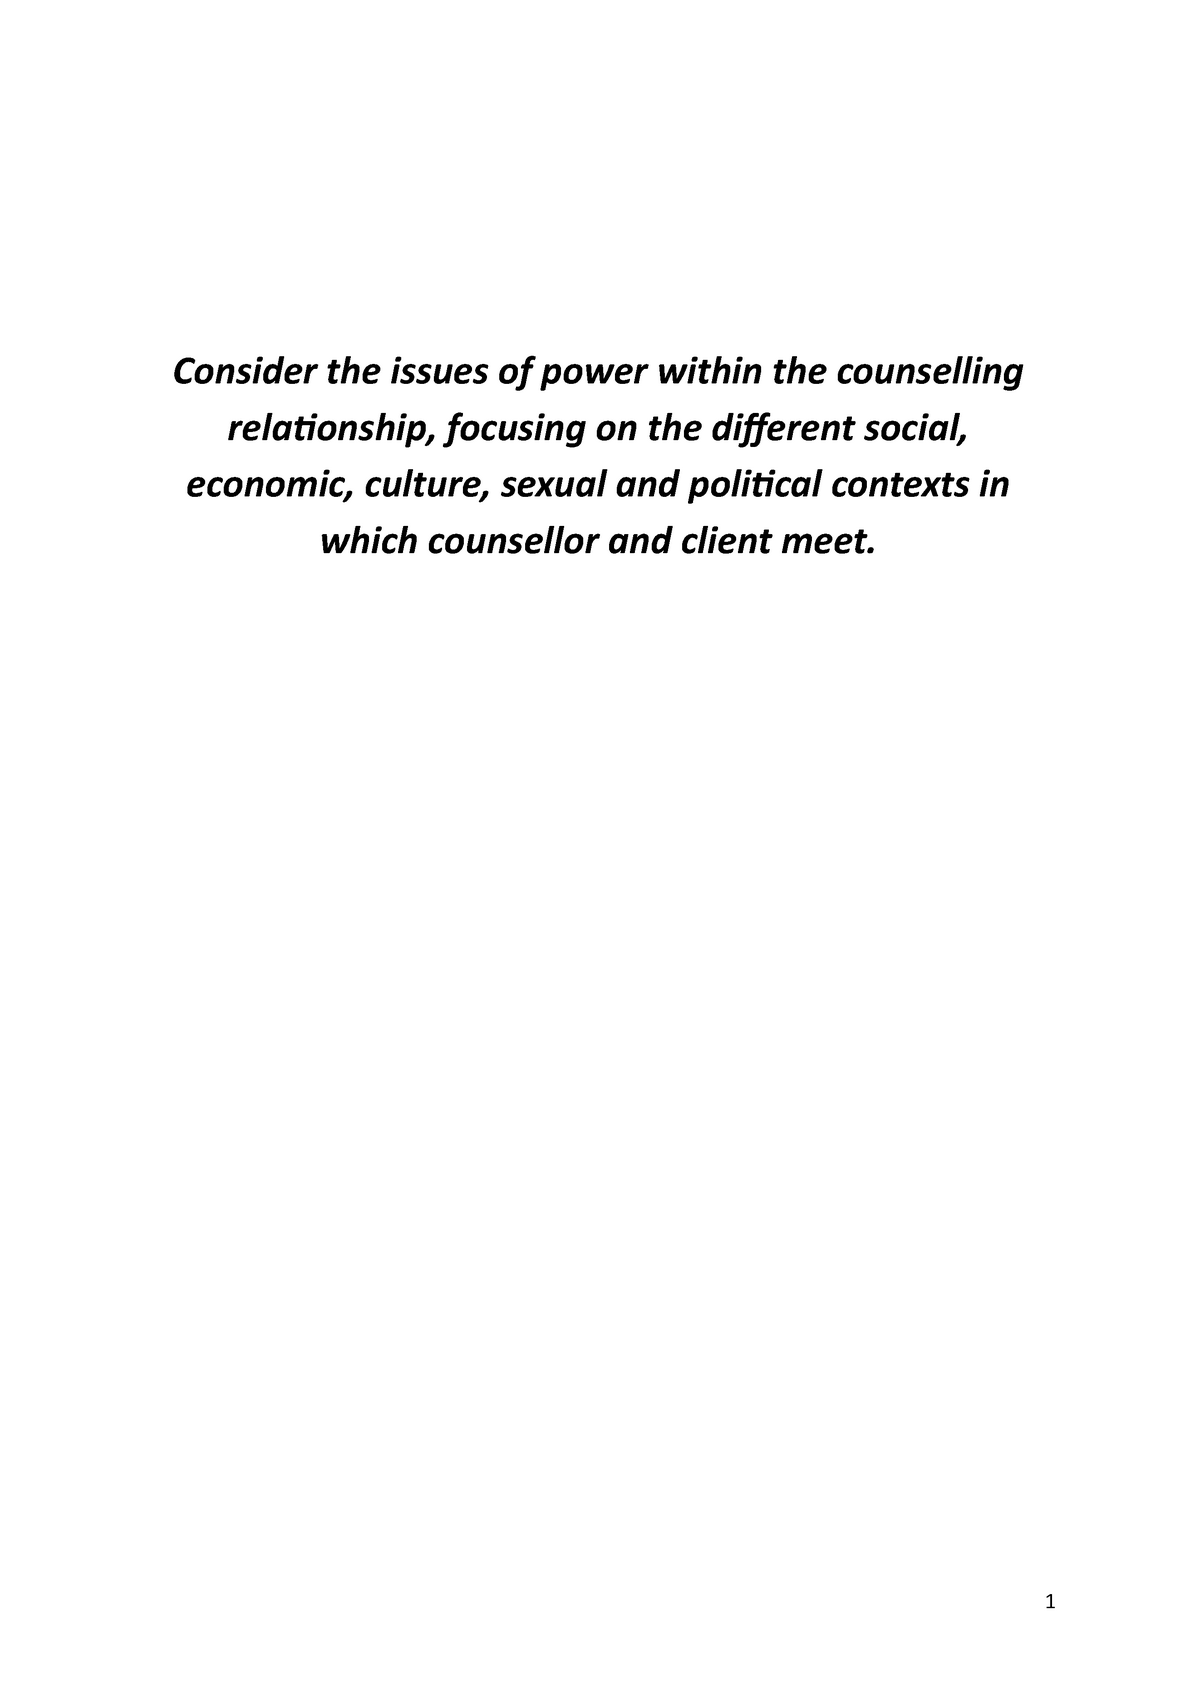 essay on power within